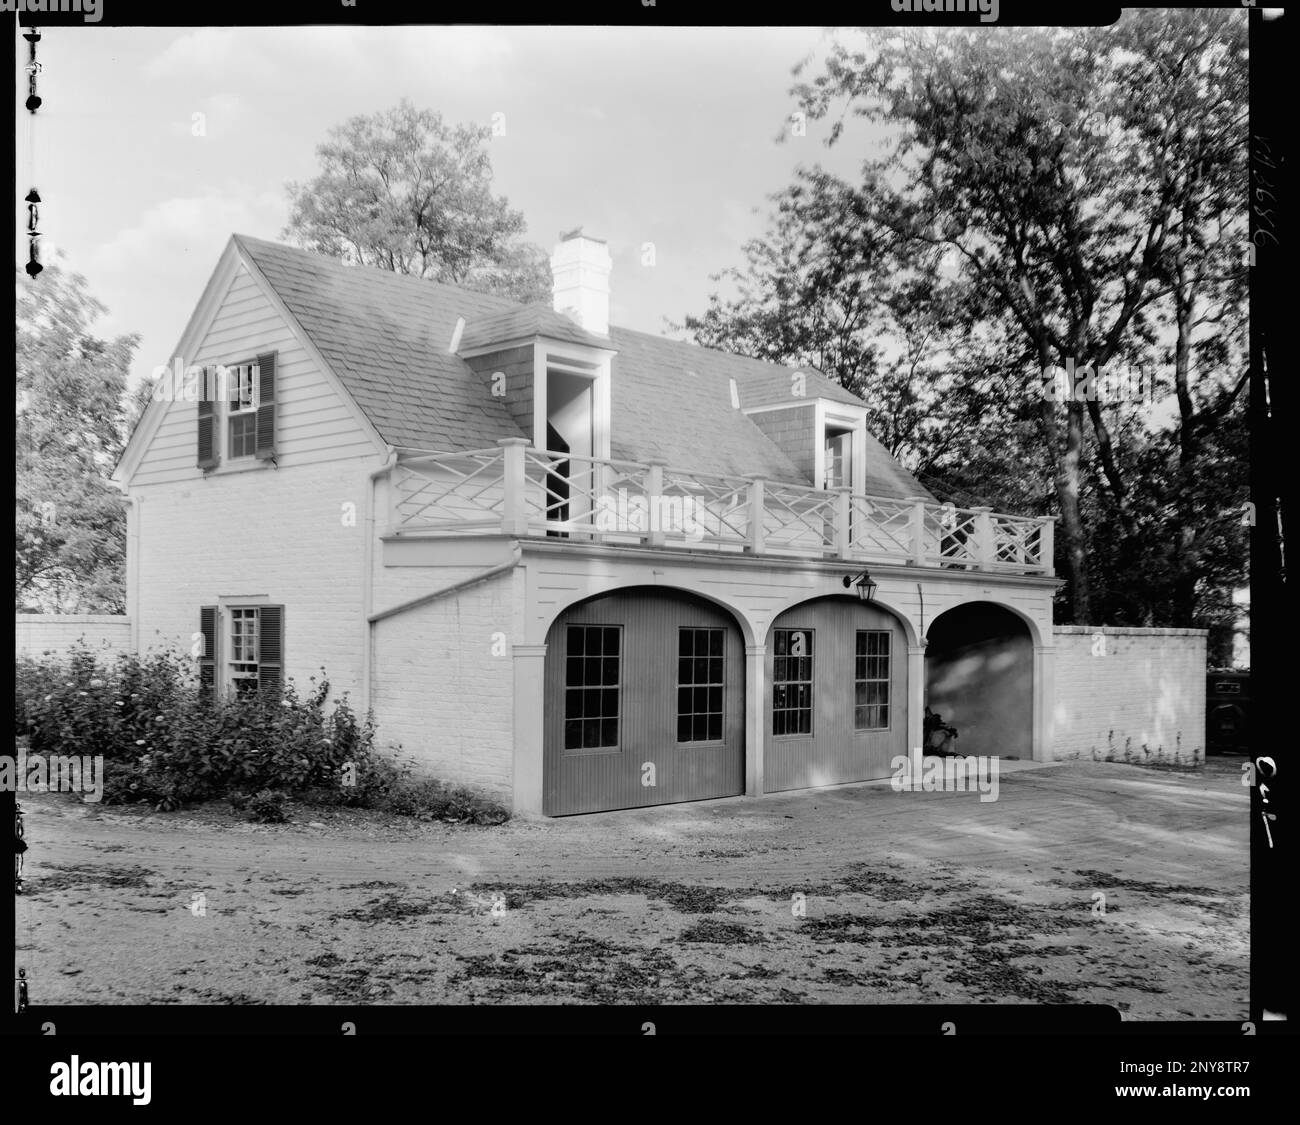 Redesdale, 8603 River Road, Richmond, Henrico County, Virginia. Carnegie Survey of the Architecture of the South. United States  Virginia  Henrico County  Richmond, Hand railings, Garages. Stock Photo